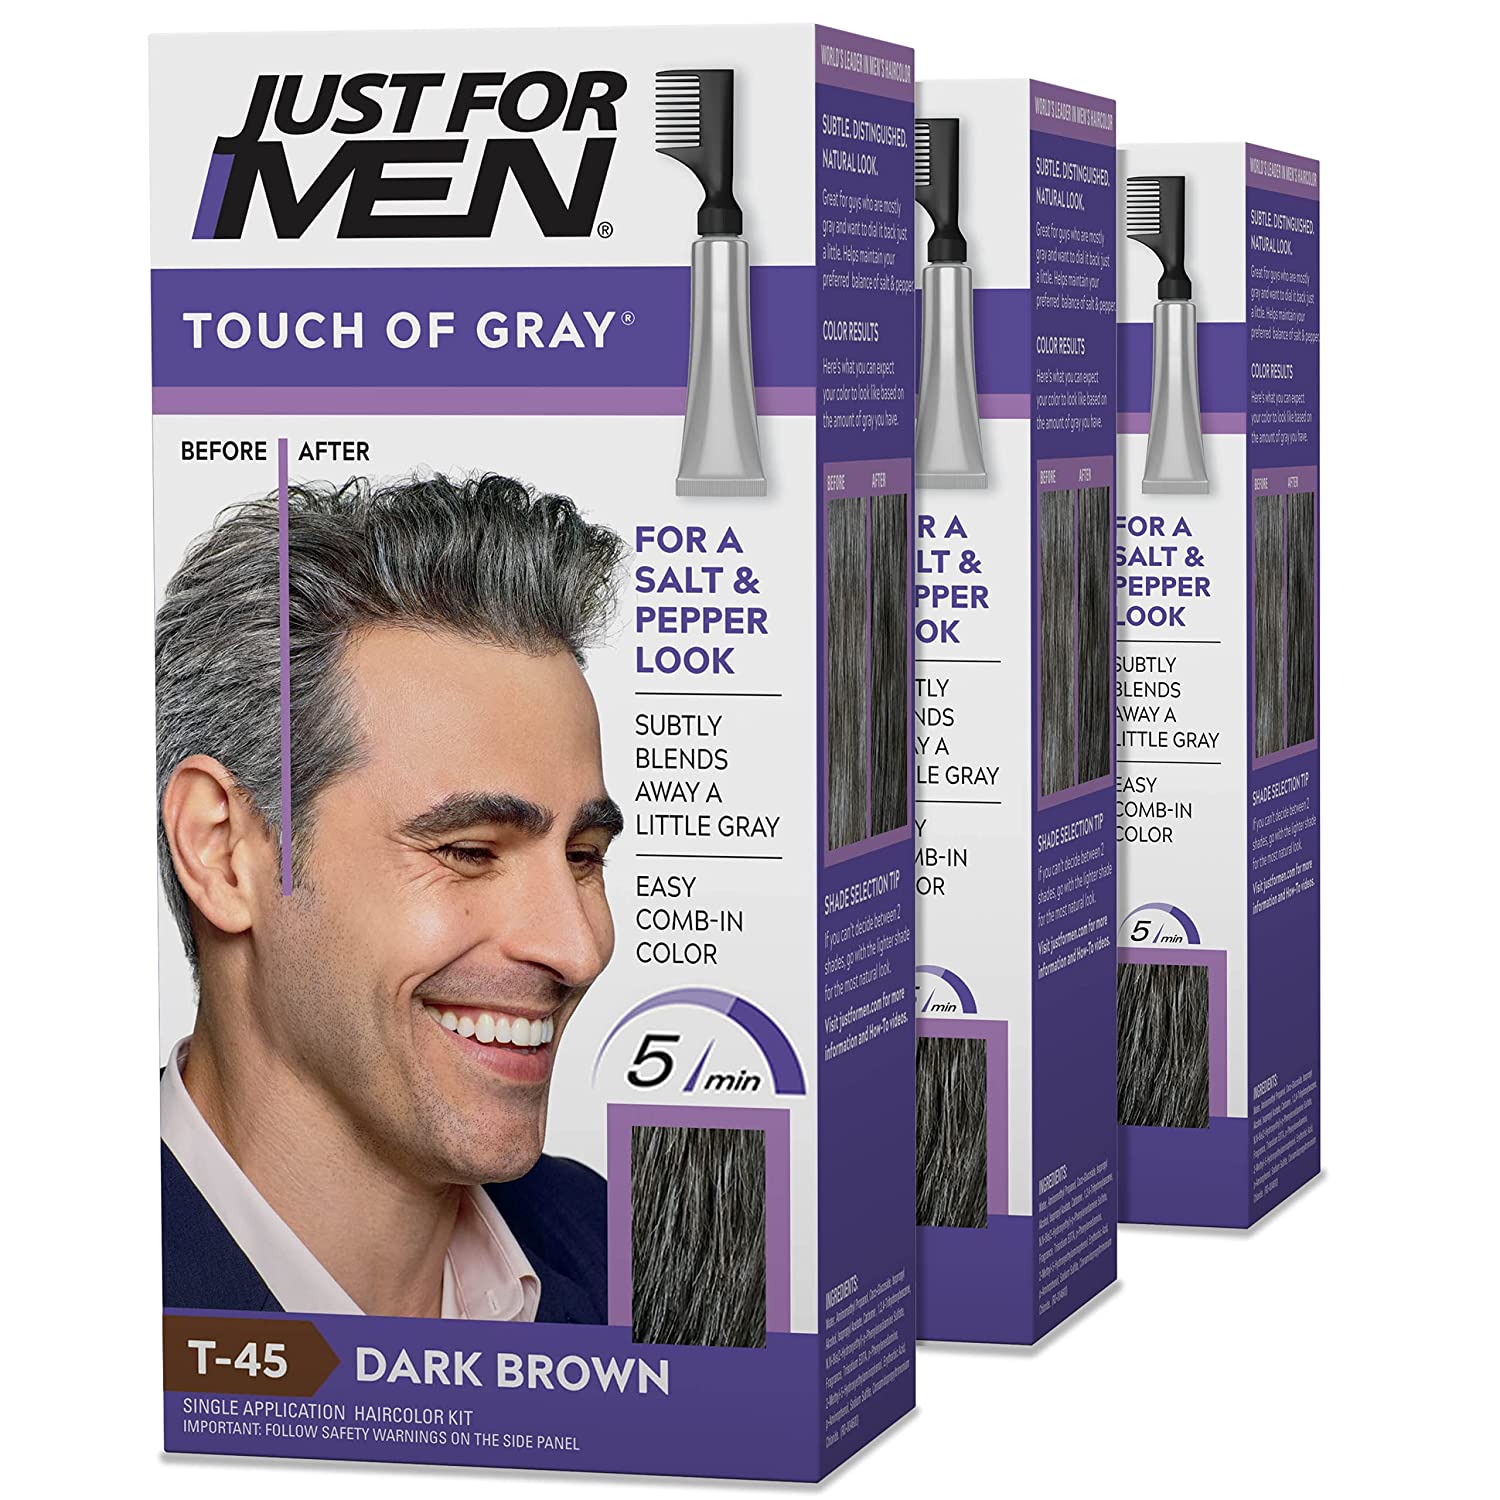 Just For Men Touch of Gray, Gray Hair Coloring for Men with Comb Applicator Dark Brown, T-45 - Pack of 3